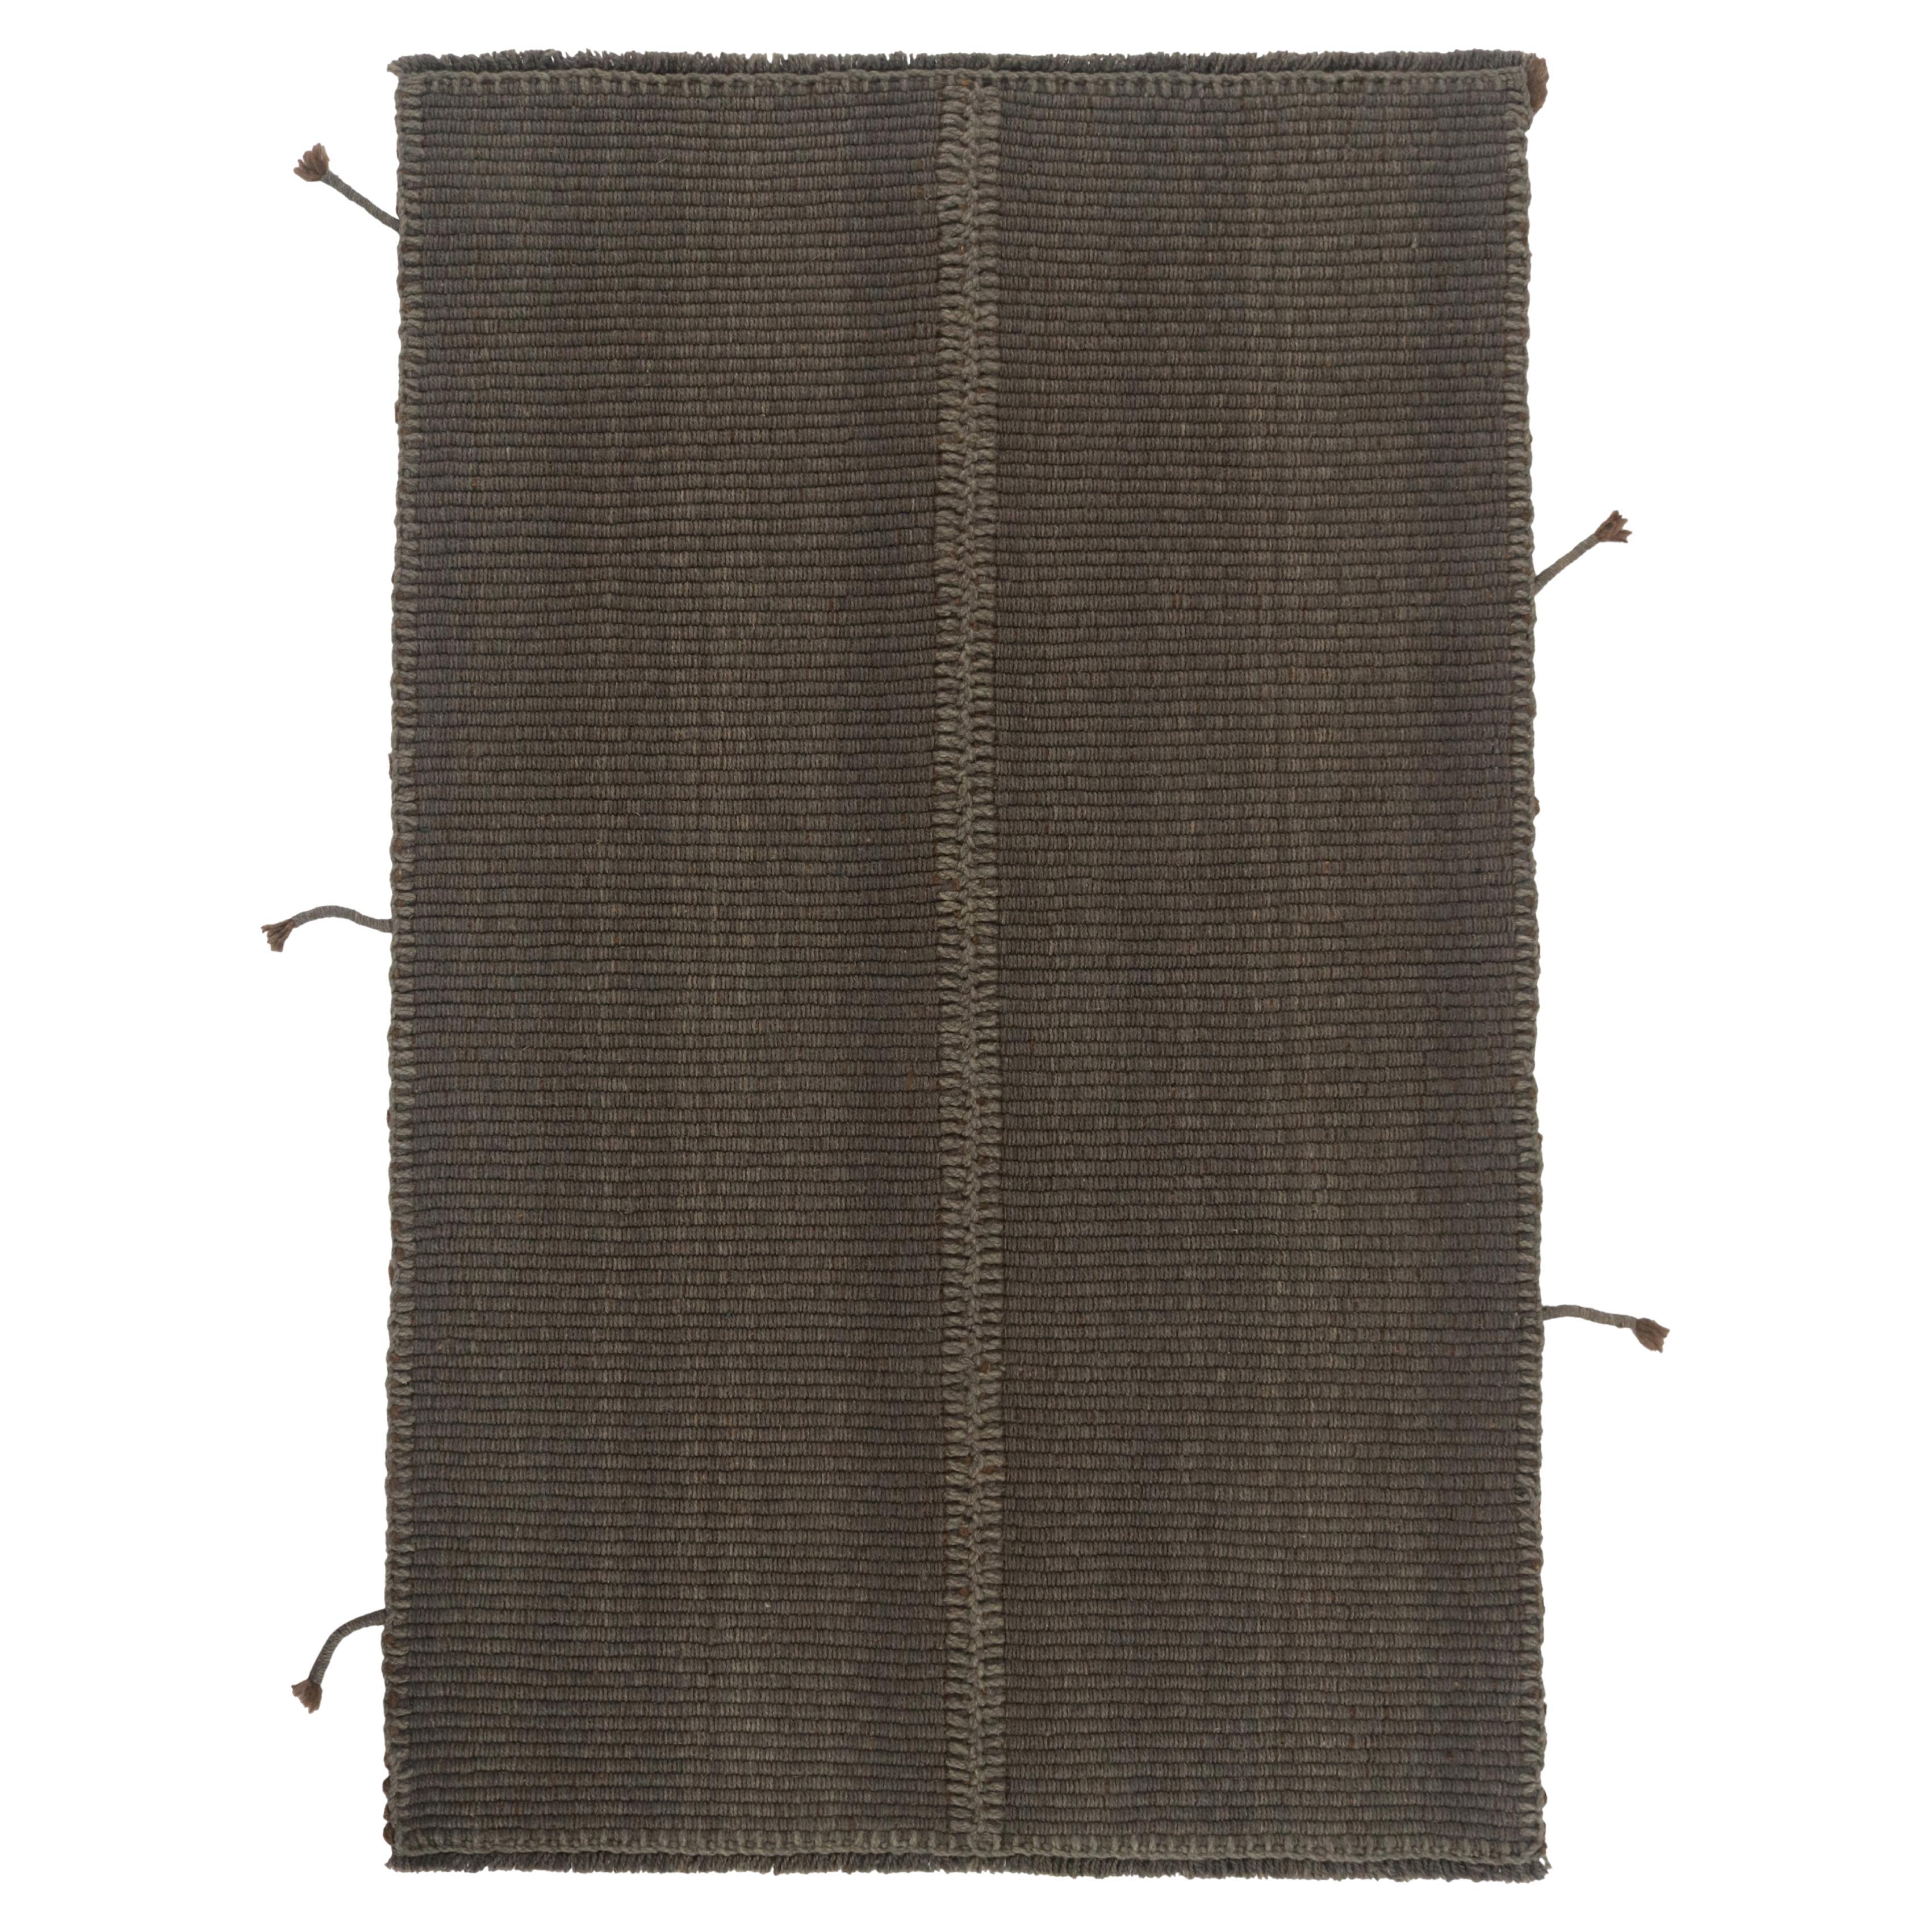 Rug & Kilim’s Contemporary Kilim in Gray with Brown Accents For Sale